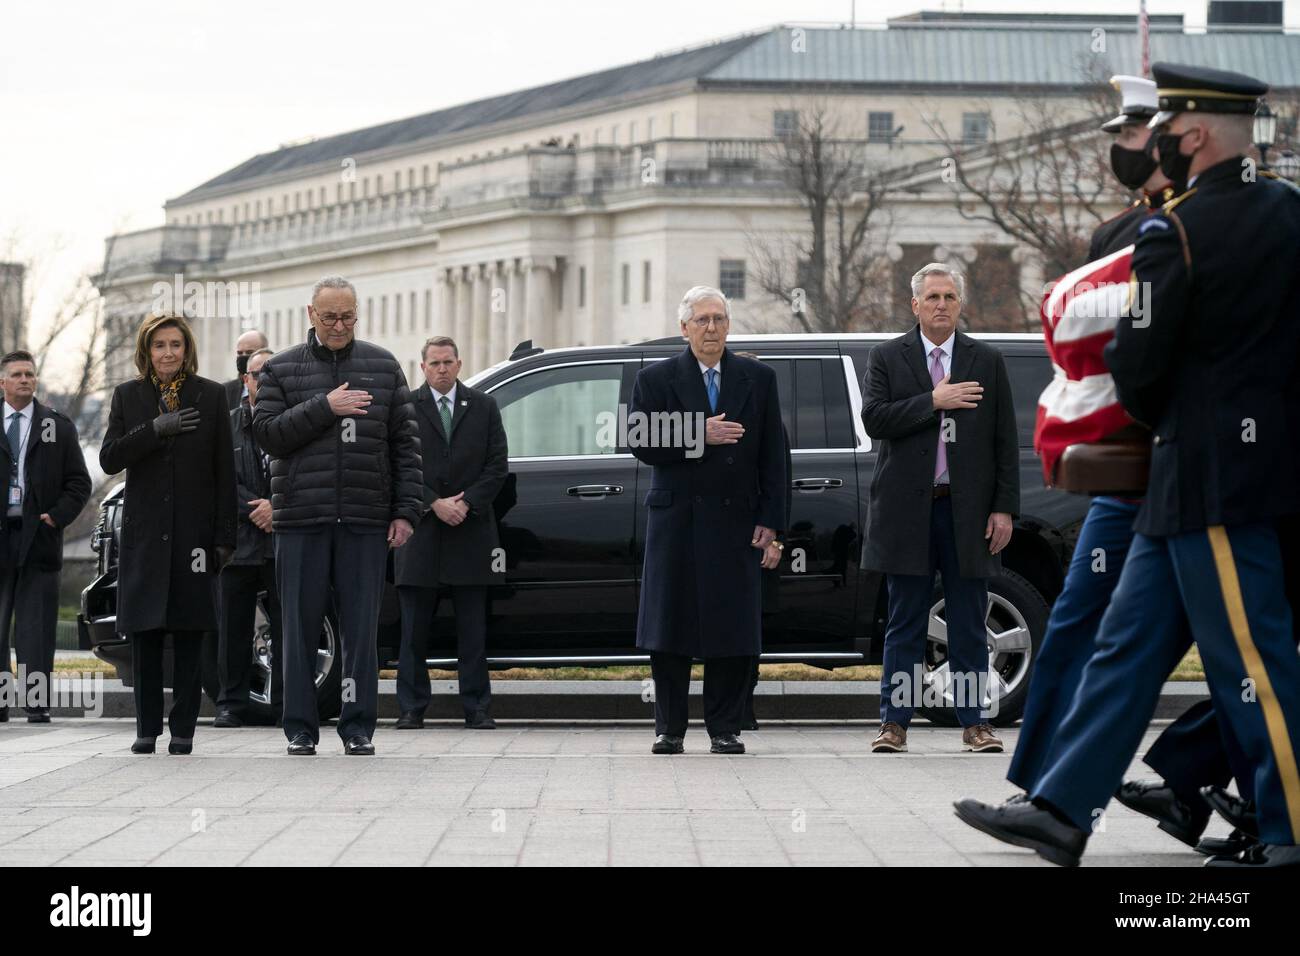 Washington DC, USA. 10th Dec 2021. Speaker Nancy Pelosi (D-Calif.), Majority Leader Charles Schumer (D-N.Y.), Minority Leader Mitch McConnell (R-Ky.) and House Minority Leader Kevin McCarthy (R-Calif.) watch a military honor guard carries the casket of Sen. Bob Dole (R-Kan.) after lying in state at the U.S. Capitol in Washington, DC, on Friday, December 10, 2021. Dole will be taken to Washington National Cathedral for a funeral service. Photo by Greg Nash/Pool/ABACAPRESS.COM Credit: Abaca Press/Alamy Live News Stock Photo